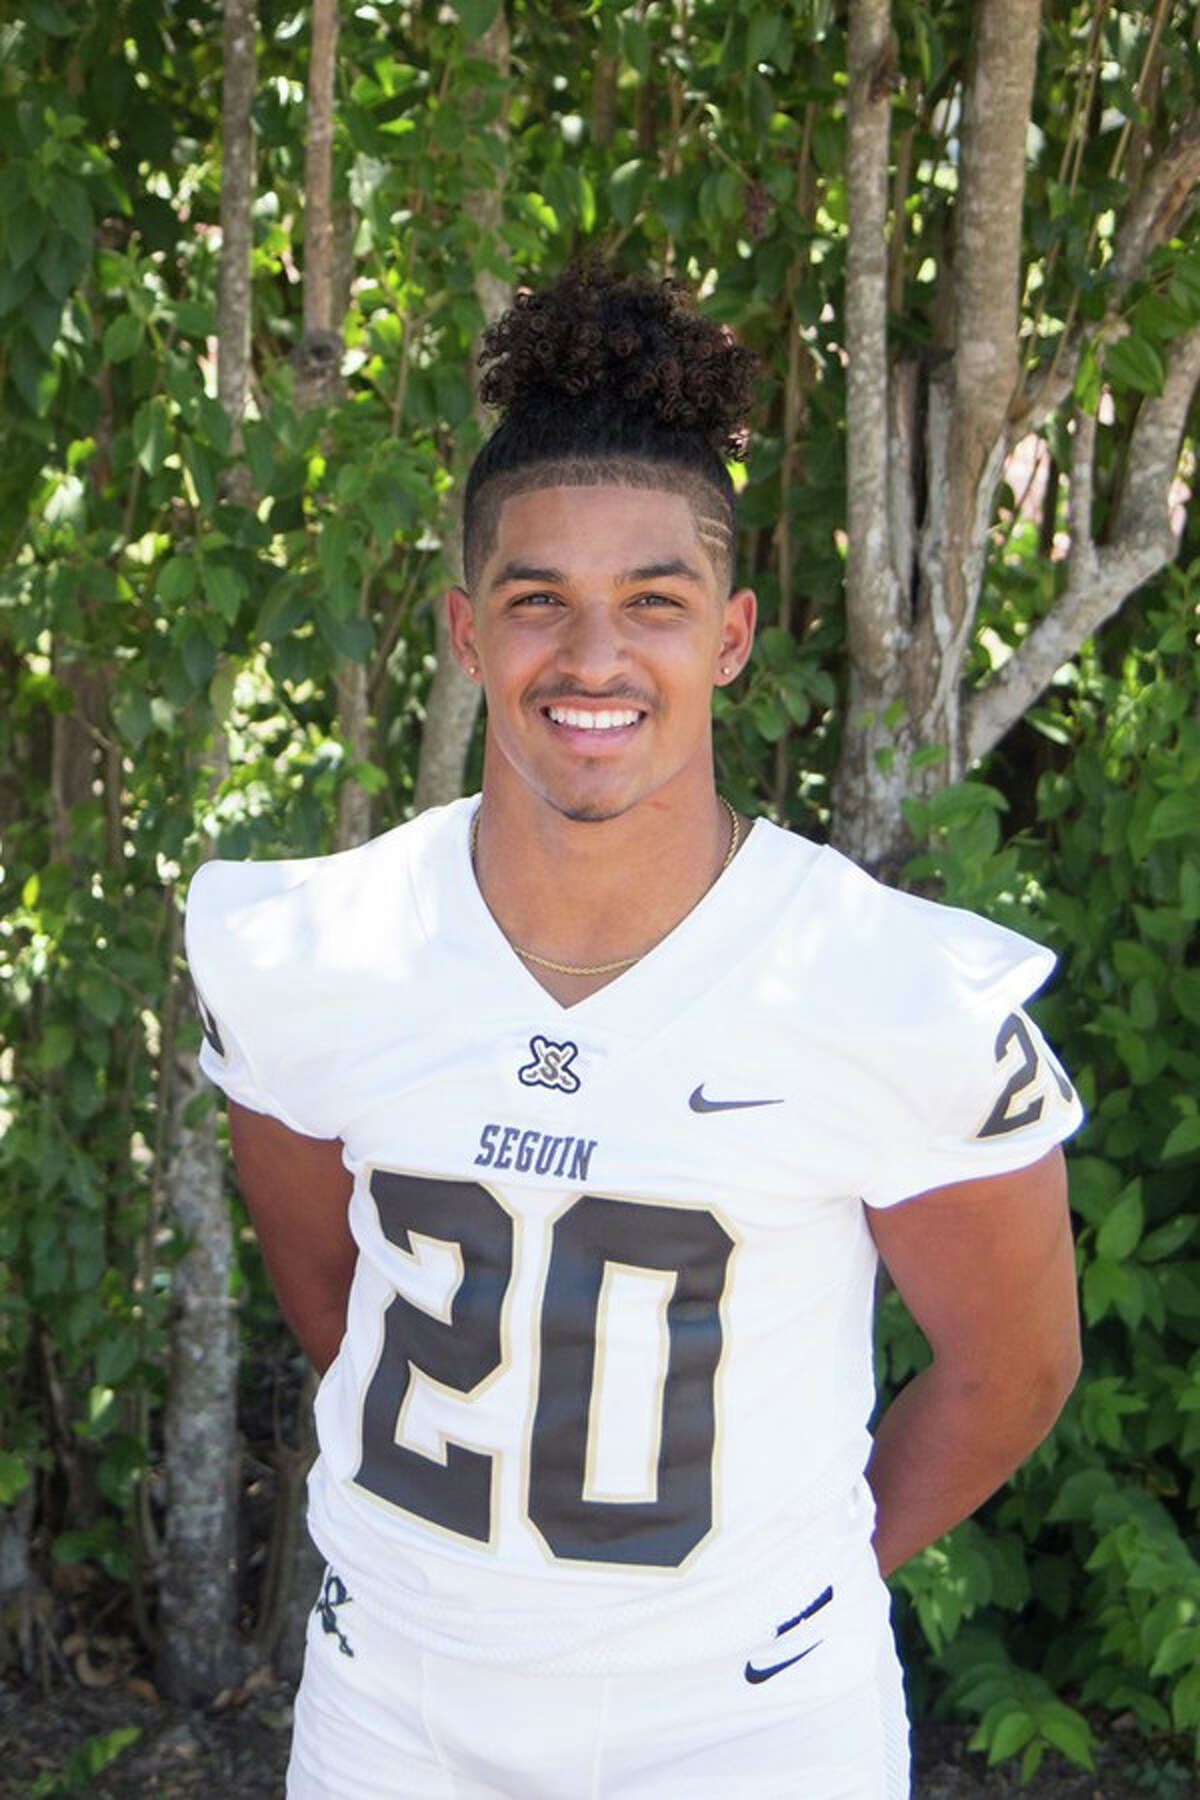 Darien Shannon, Seguin football, is the Express-News' week 8 Athlete of the Week.